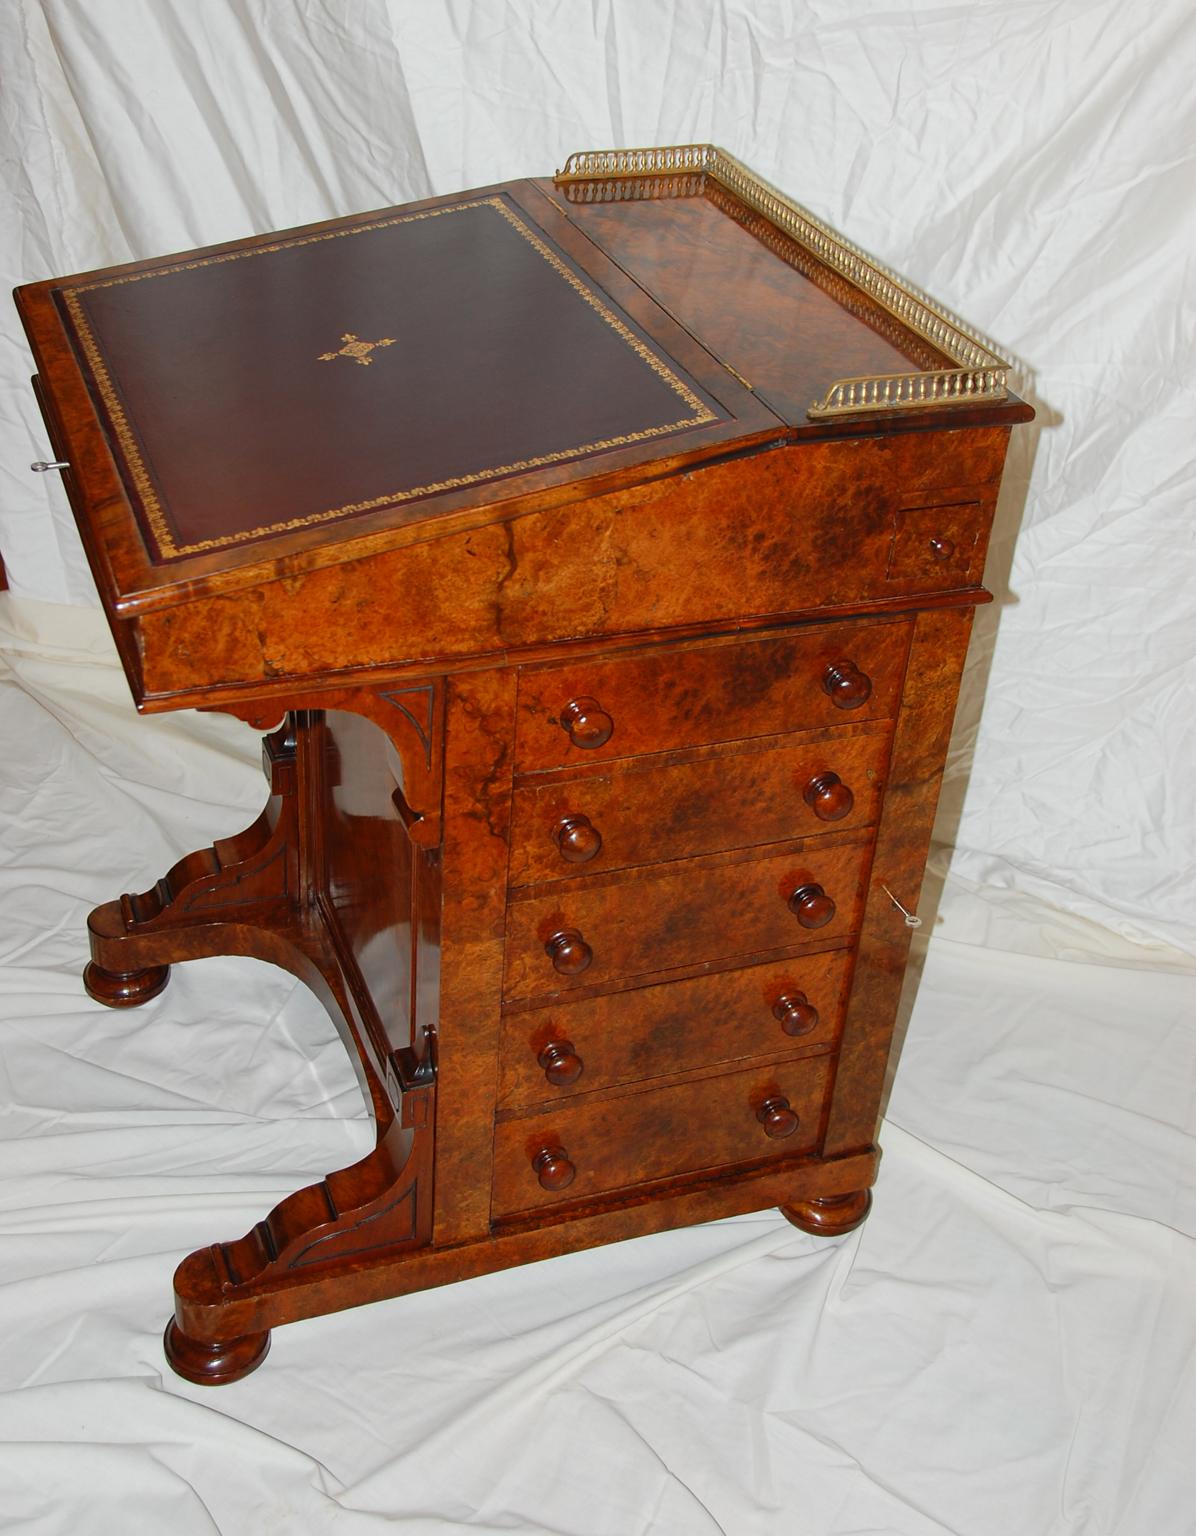 English mid-19th century burl walnut davenport desk with Wellington locking bar for the five side drawers (one key locks all the drawers at the same time) on the right hand side. The left side has sham drawers. There is also a small drawer that